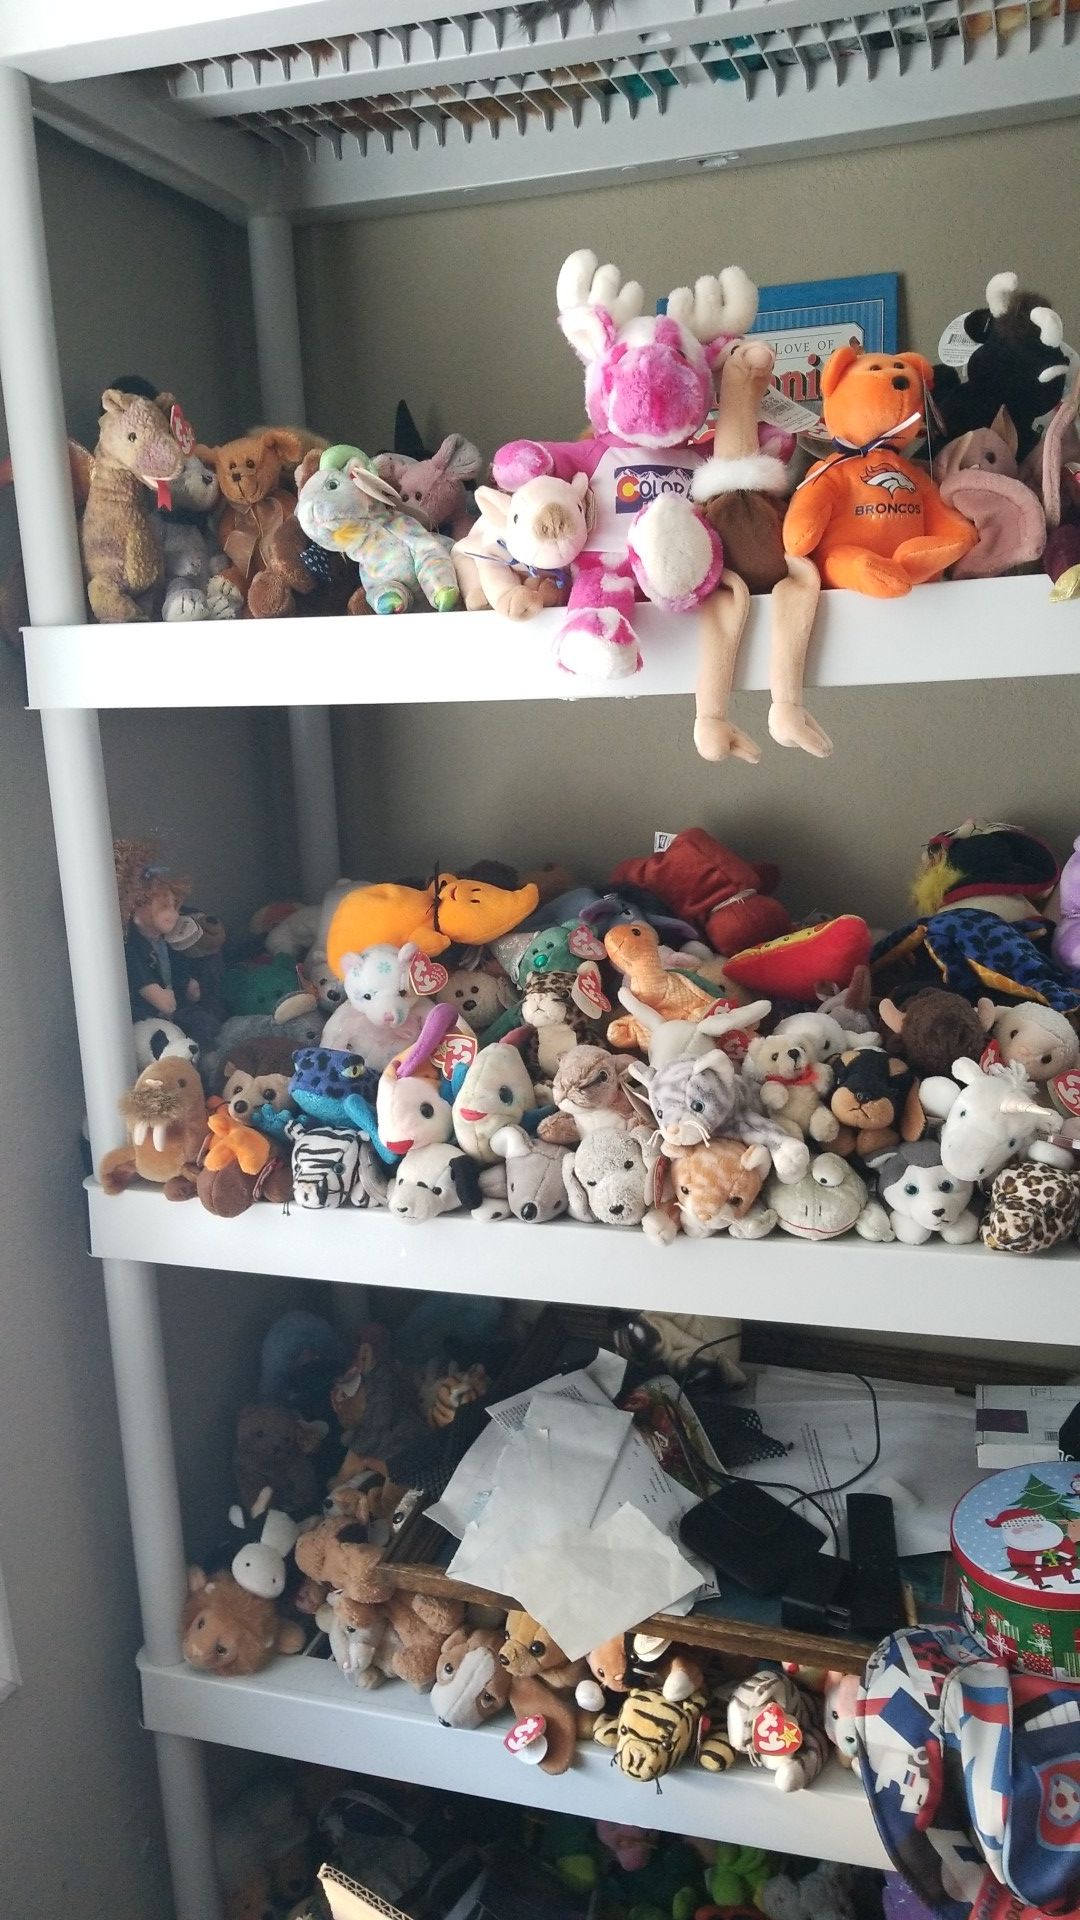 Big Beanie Baby collection